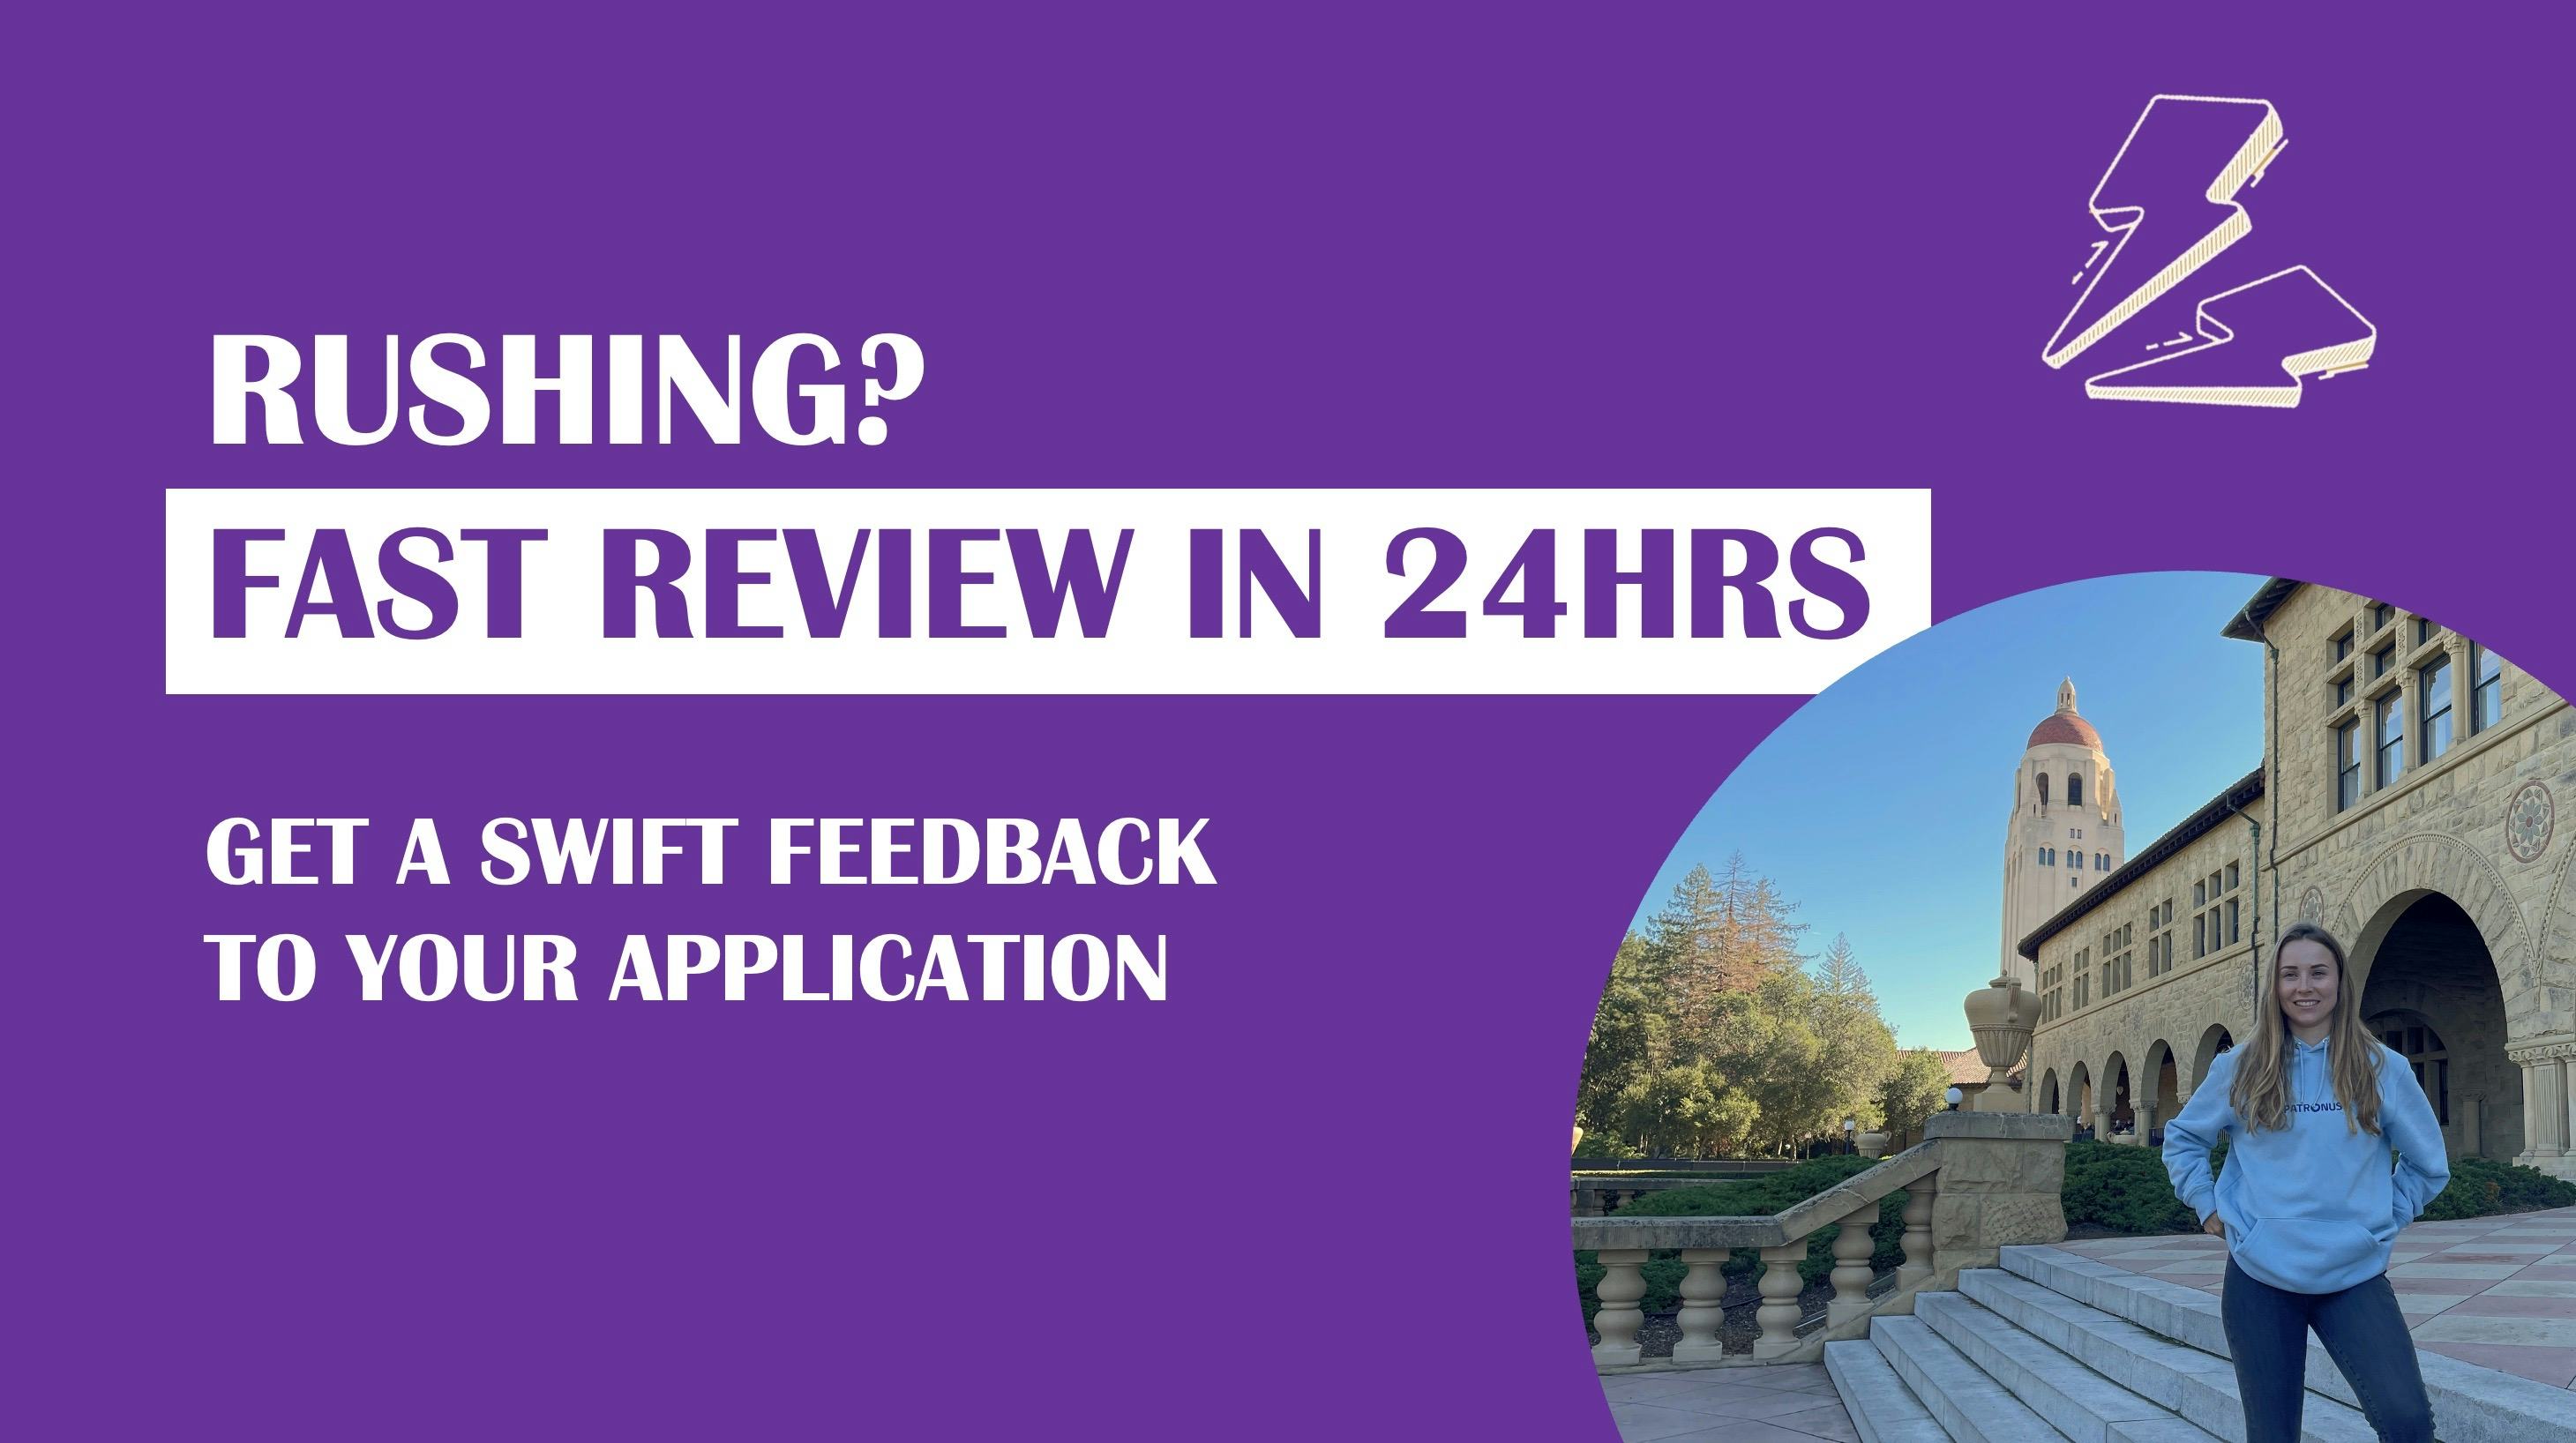 URGENT REVIEW: get feedback within 24hrs